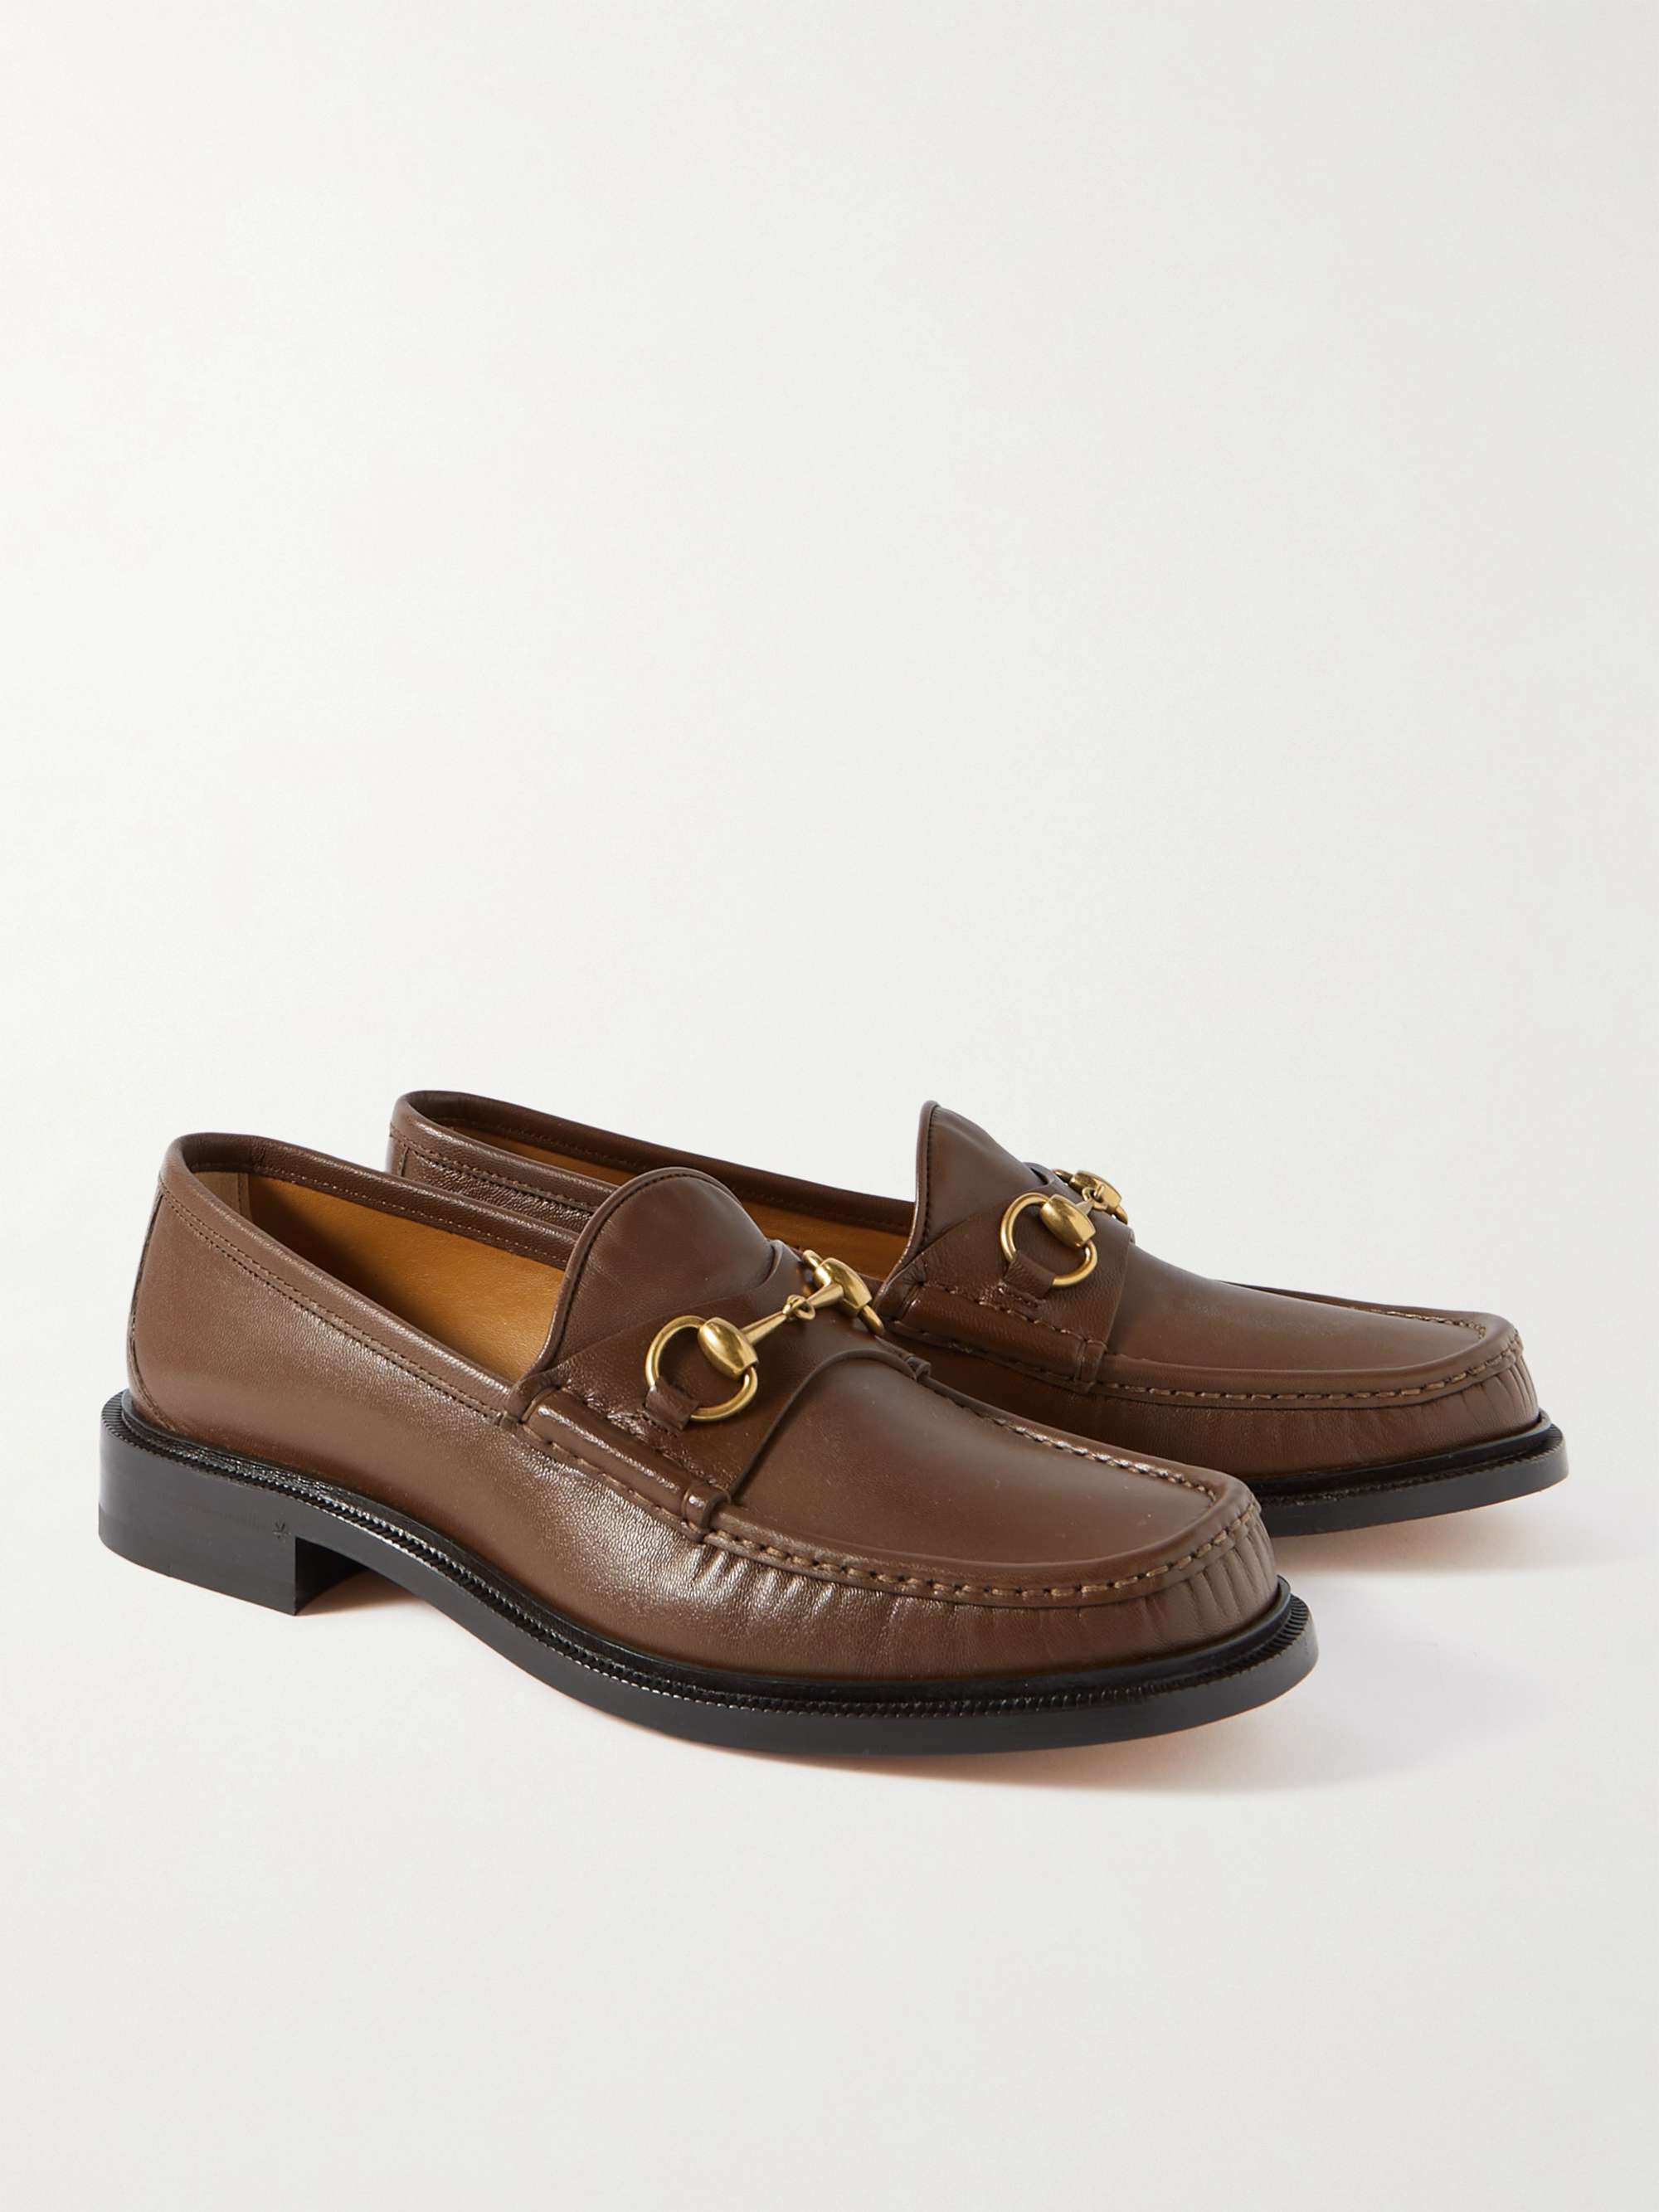 GUCCI Horsebit Leather Loafers